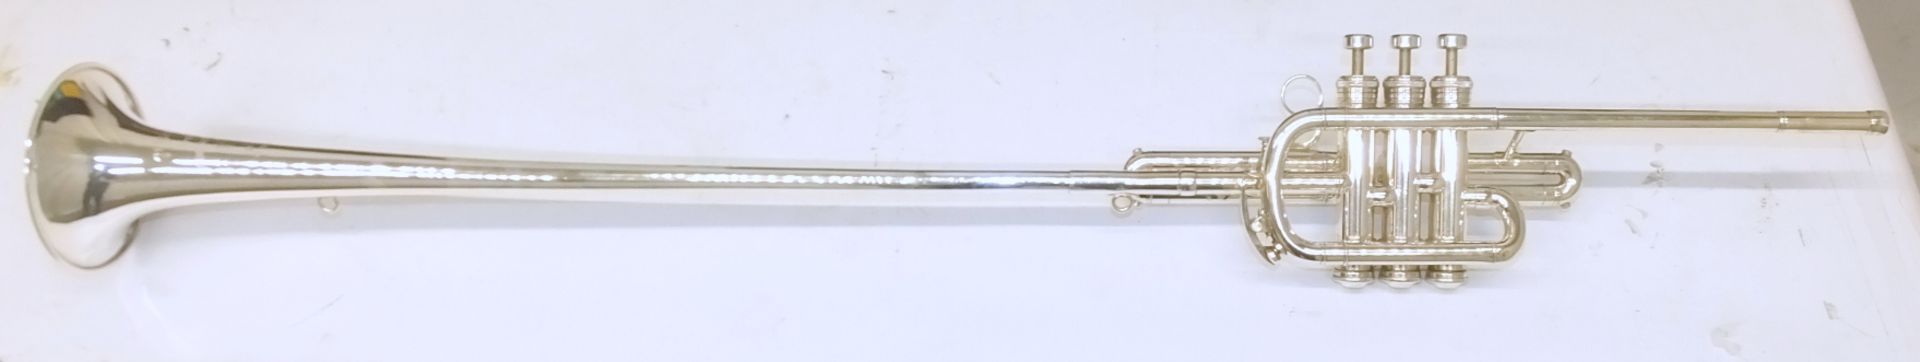 Boosey & Hawkes Fanfare Trumpet in Besson case - Serial Numbers in description. - Image 9 of 10